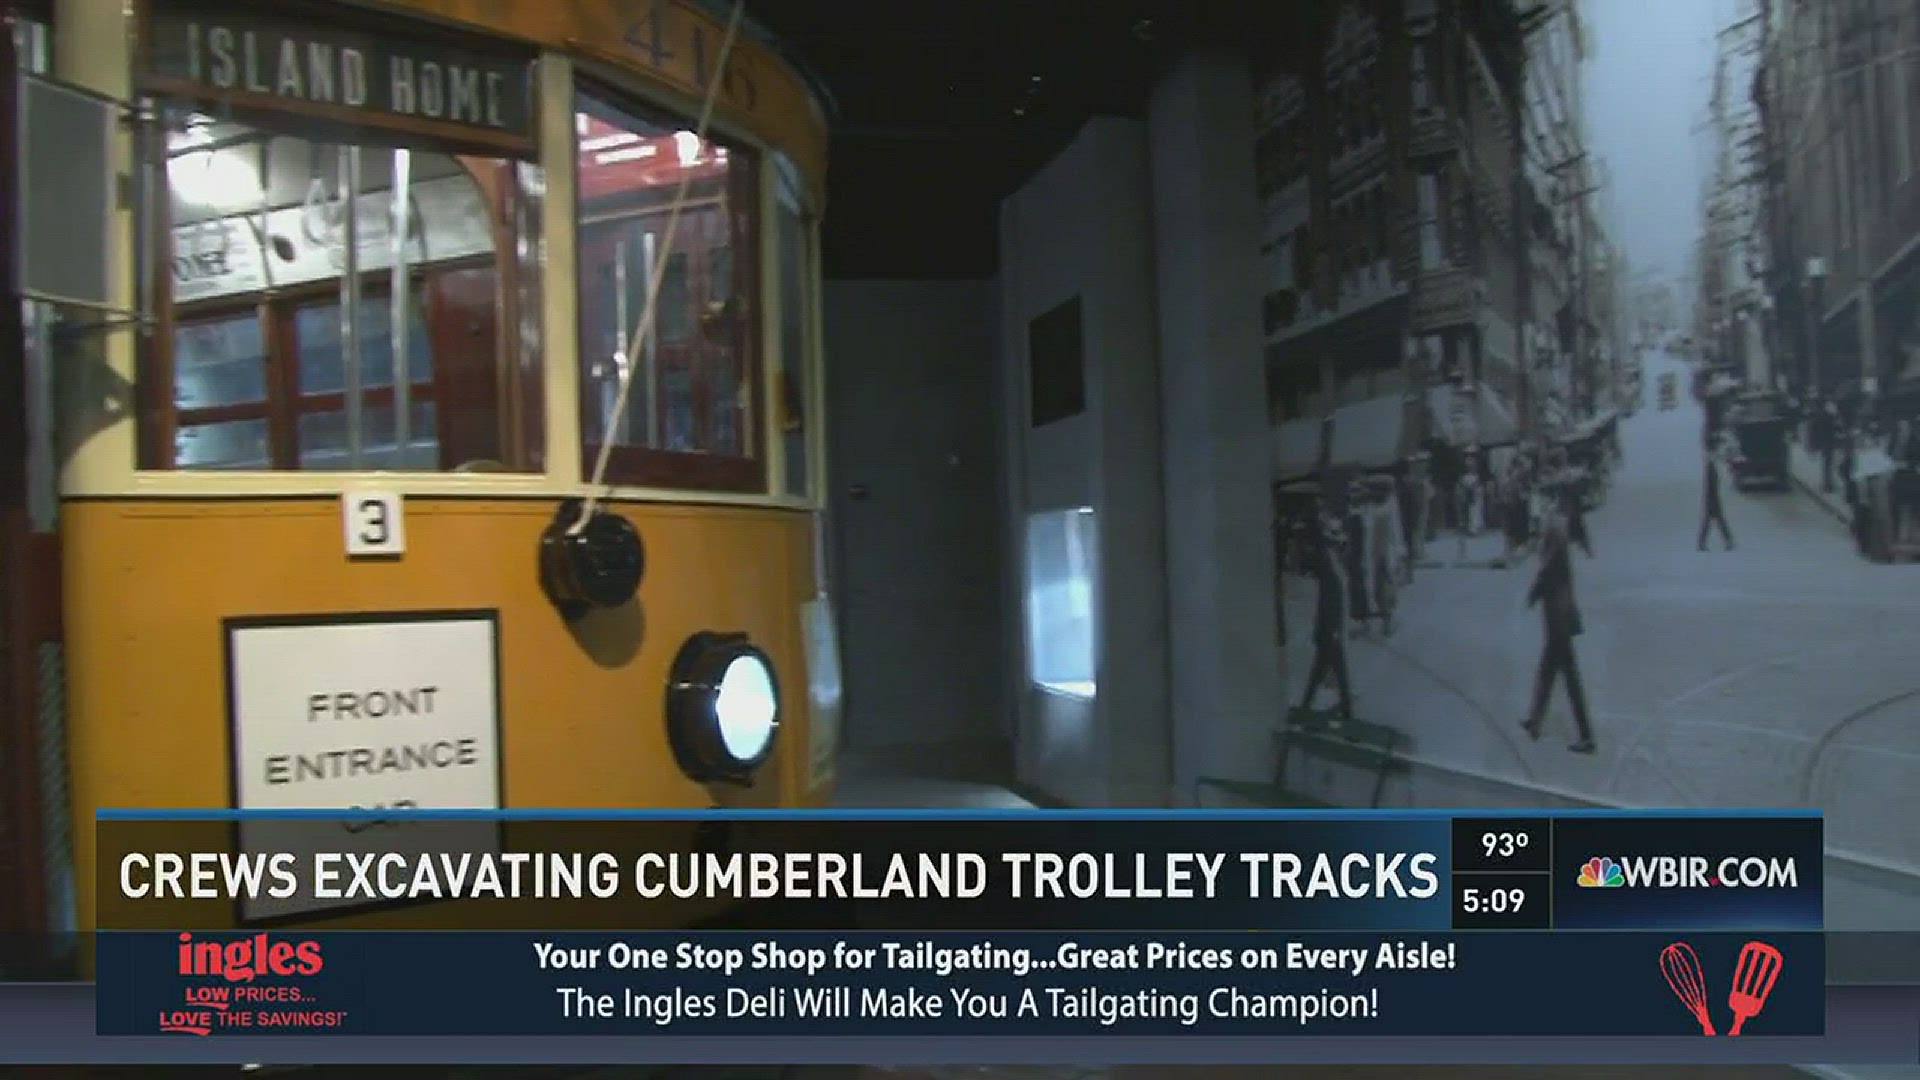 Sept. 6, 2016: It will take 10 days for a city contractor to excavate and remove buried pre-World War II trolley tracks from Cumberland Avenue.